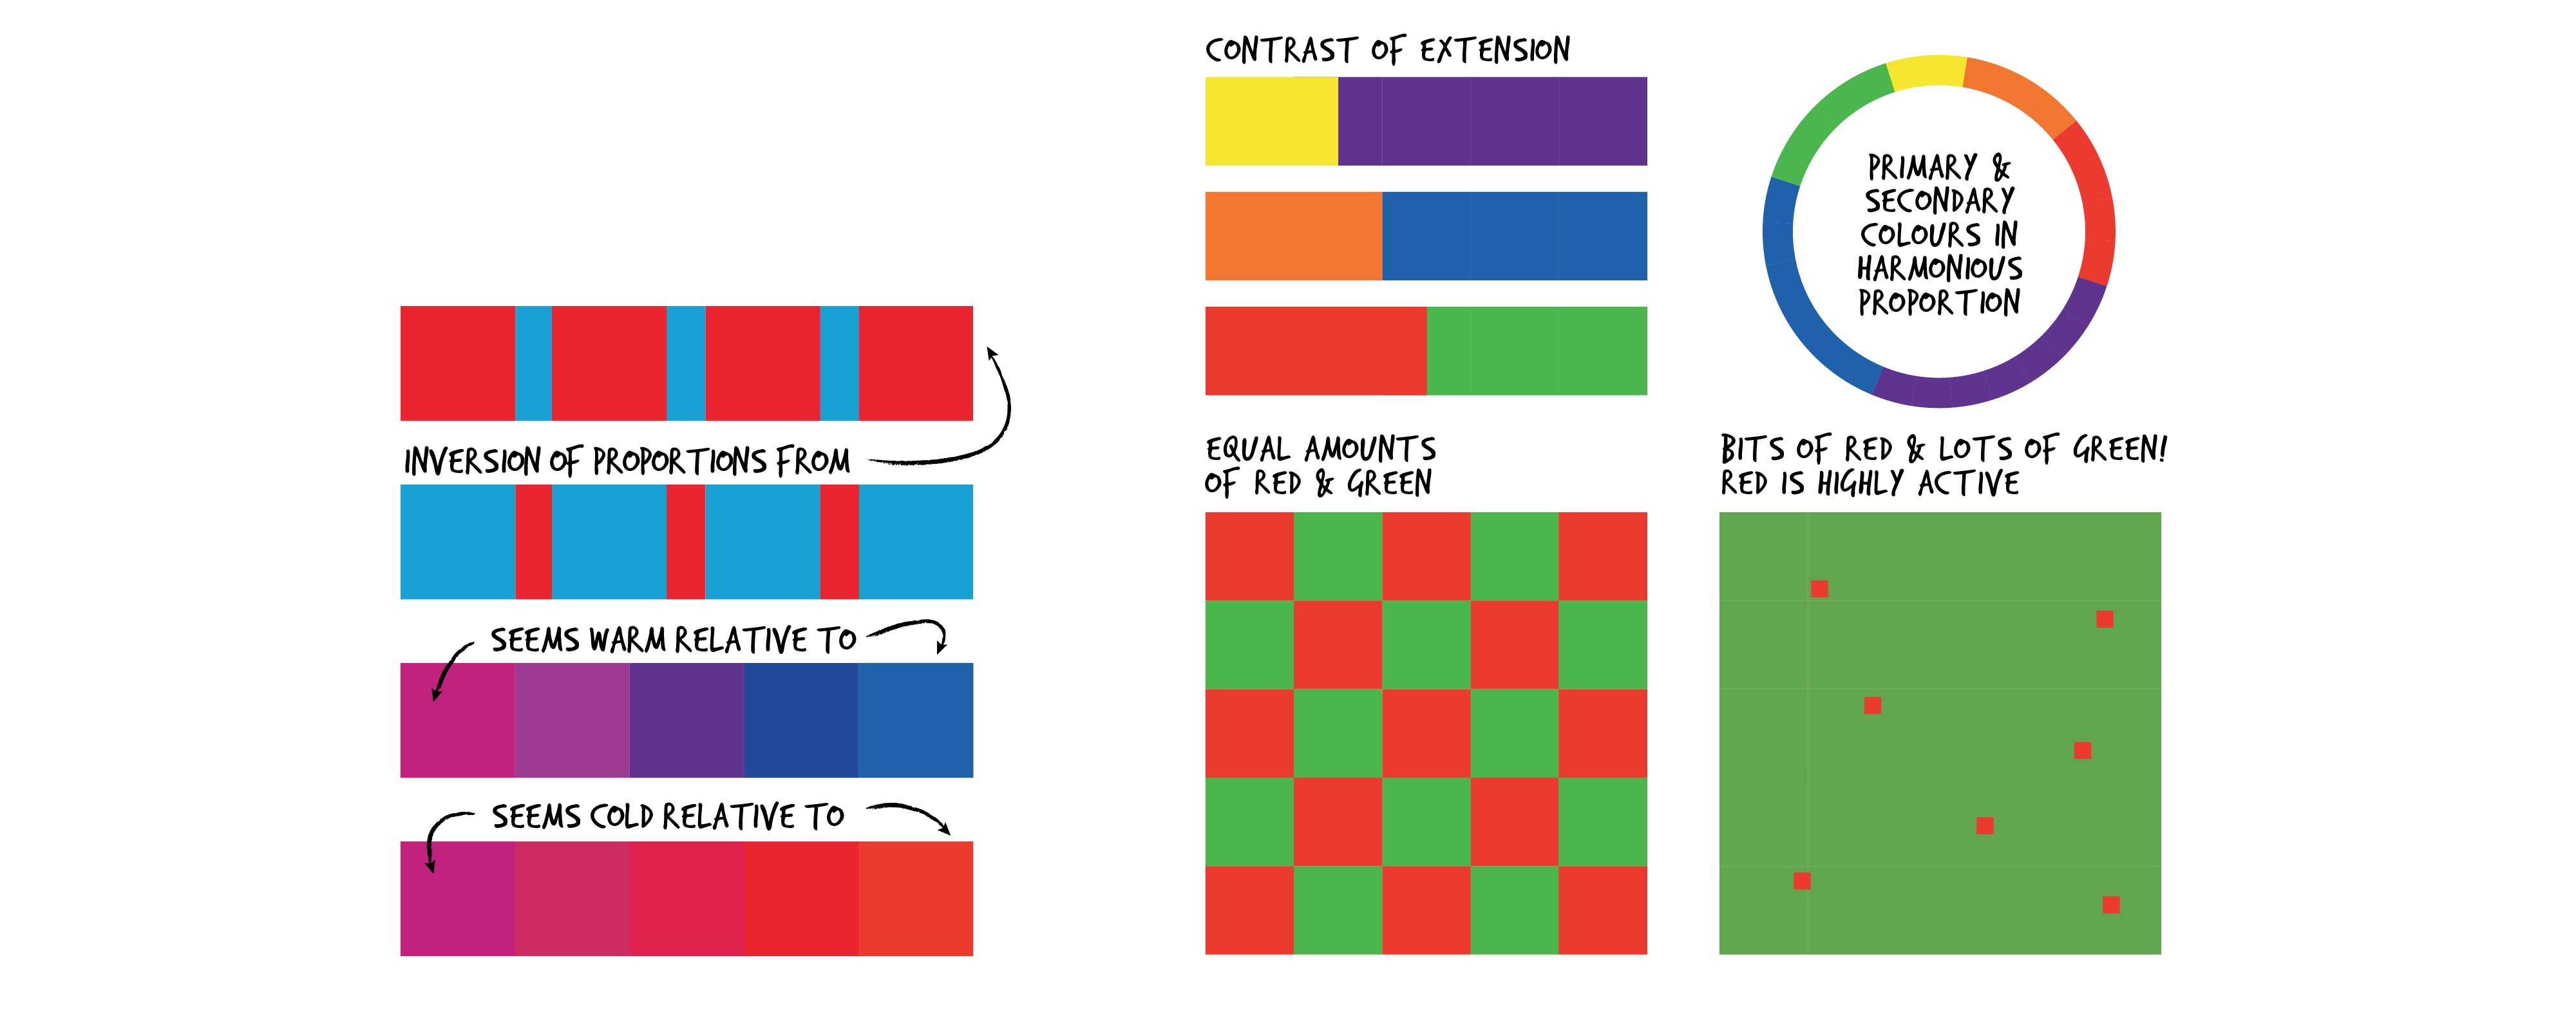 4 diagrams illustrate Contrast of Extension concept. The first has 4 horizontal colour bars stacked atop one another. The top bar is titled Highest Warm/Cold Contrast and has large red sections contrasting small blue sections. The second bar is titled Inversion of Proportions and has large blue sections contrasting small red sections, which is harder to look at than the previous bar due to the colour ratio. The bottom bars show two colour palettes, both starting with violet. The first goes from violet to blue, showing that violet is warmer than blue. The second goes from violet to red, showing that violet is cooler than red. The second disagram is titled Contrast of Extension and has 3 rectangles stacked on top of one another. Top rectangle is 1/3 yellow and 2/3 purple. Middle rectangle is slightly less than 1/2 orange and slightly more than 1/2 blue. Bottom rectangle is 1/2 red and 1/2 green. The third diagram is titled Primary & Secondary Colours in Harmonious Proportion and shows a colour wheel with colours yellow, orange, red, purple, blue and green. All colours take up varying amounts of space in the wheel, with yellow taking up the least space, followed by orange, red and green (about the same), blue and purple (about the same). The fourth diagram has two 5x5 red and green grids. The first grid is titled Equal Amounts of Red and Green and has the two colours in a checkered board. The second grid is a green square with 7 small red squares scattered inside. This grid is titled Bit of red, lots of green! Red is highly active.